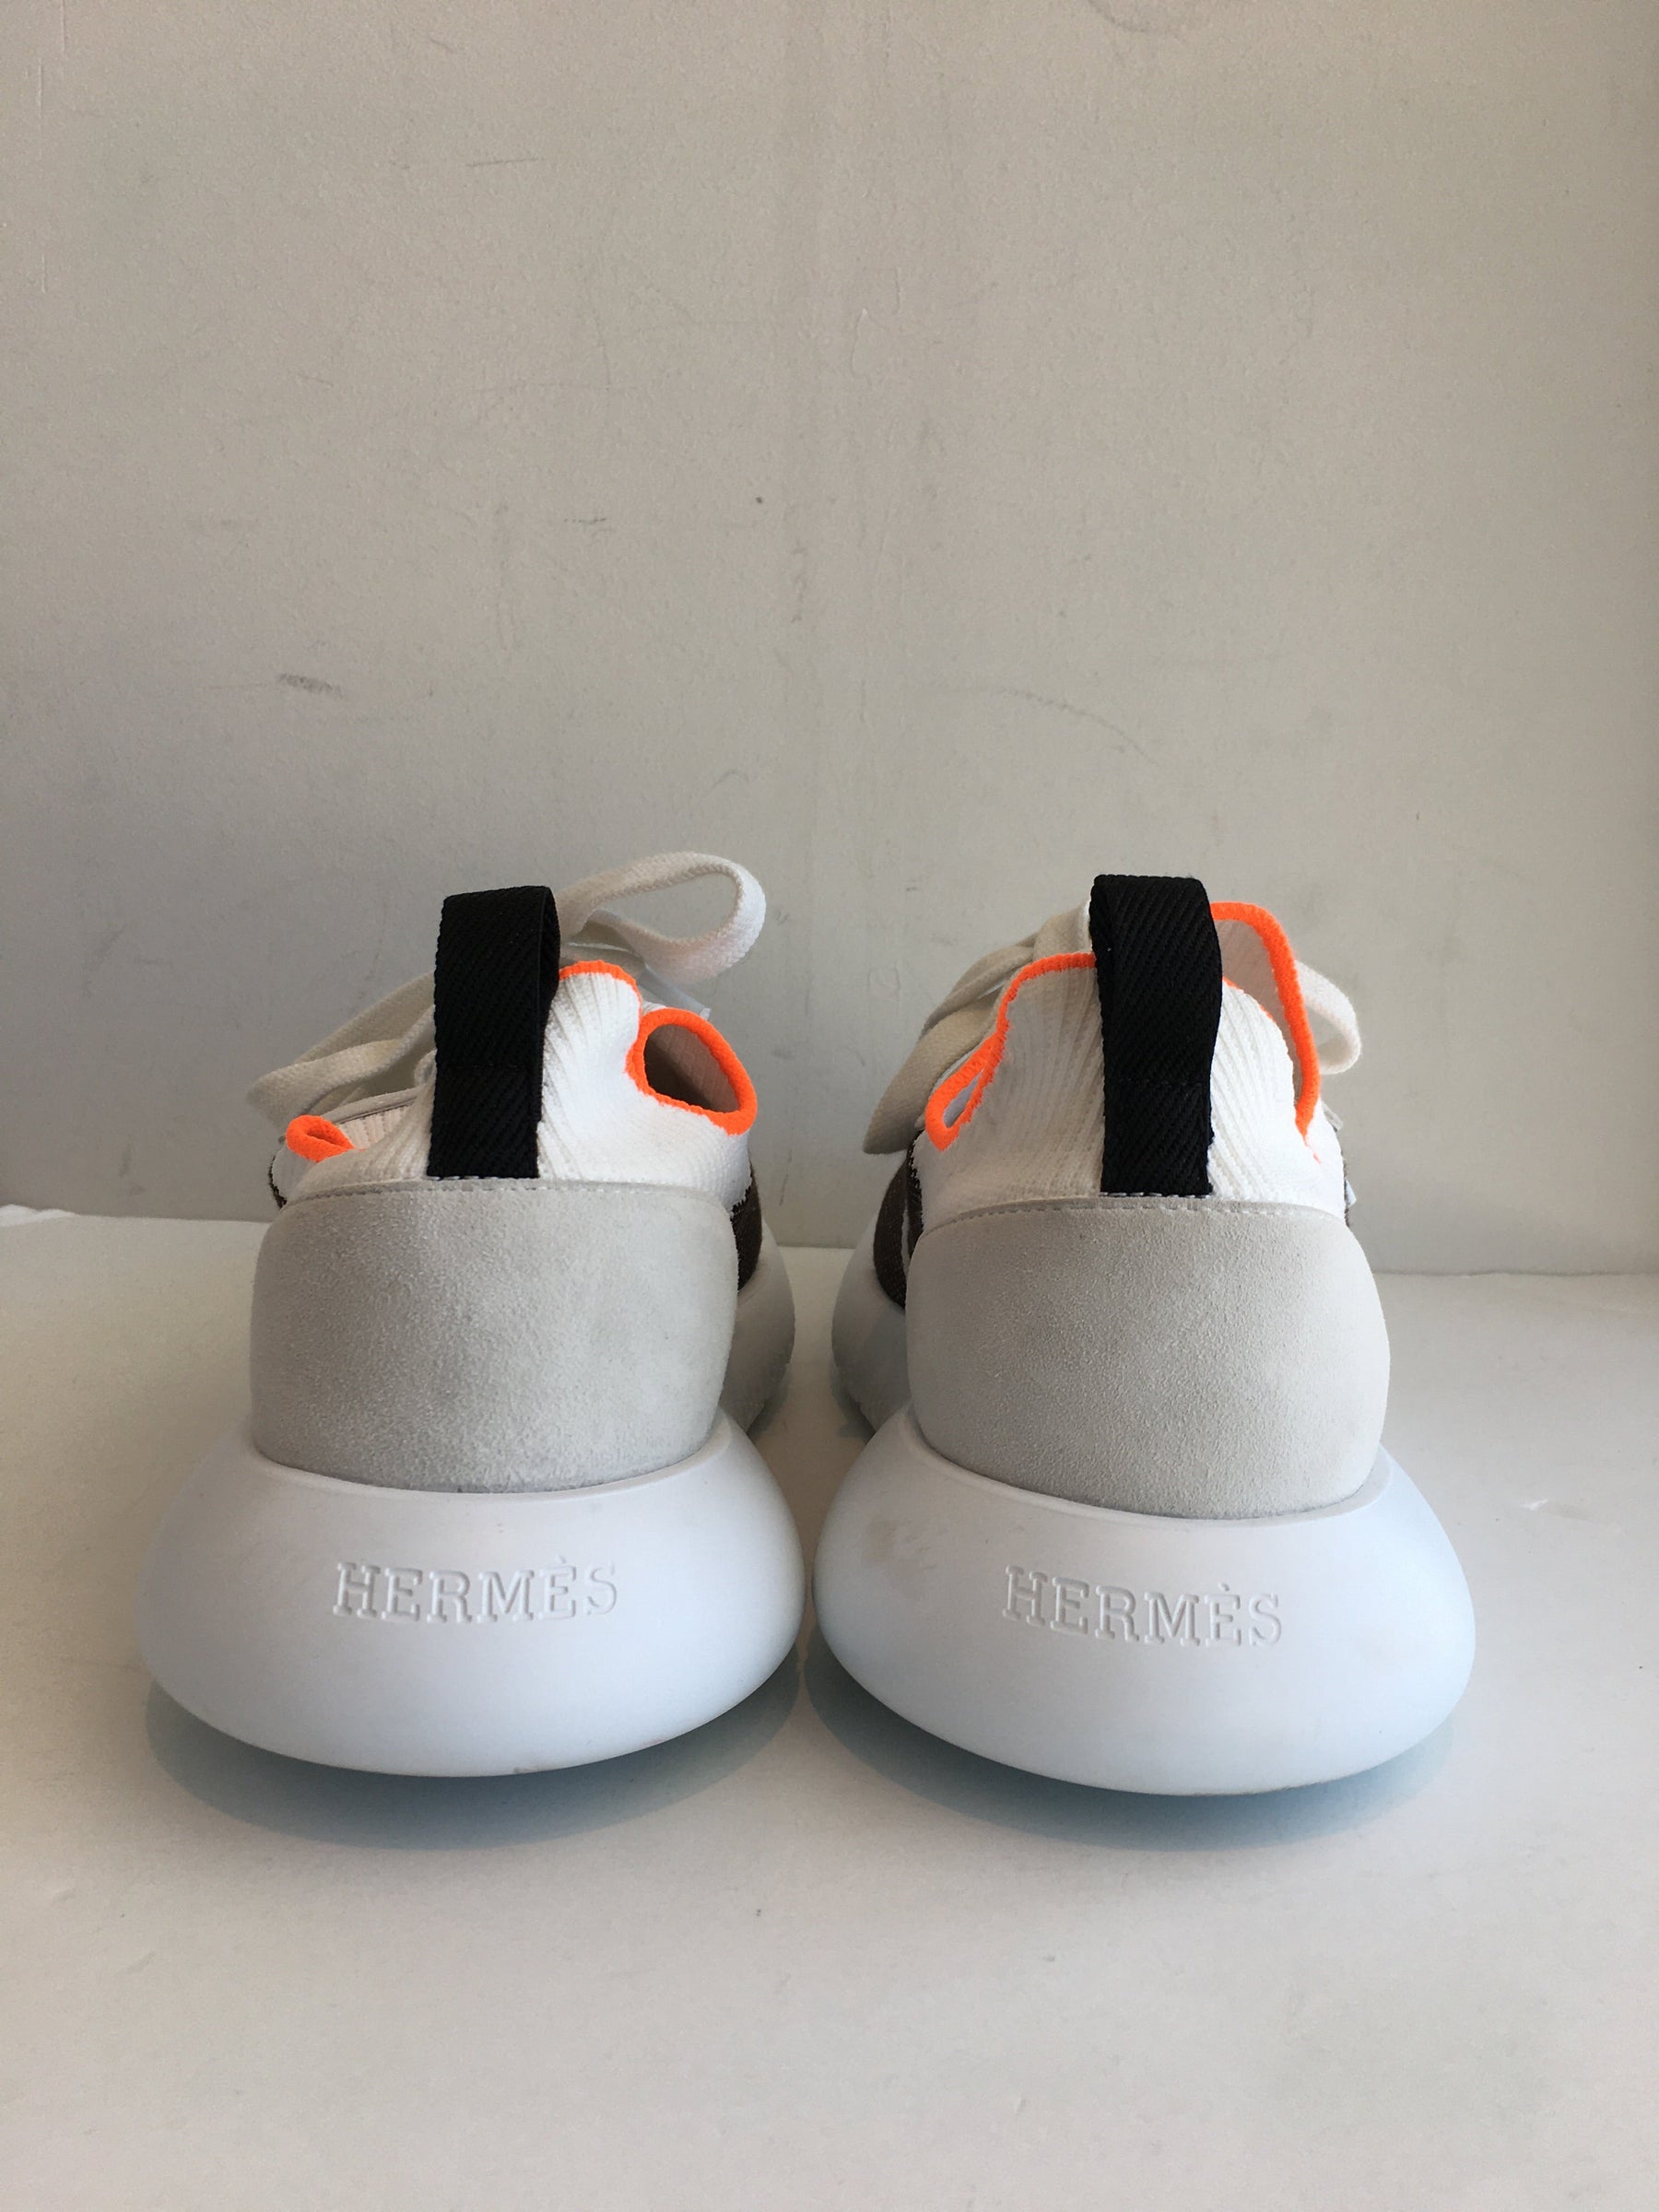 Hermès Crew Running Sneakers in White and Orange Back